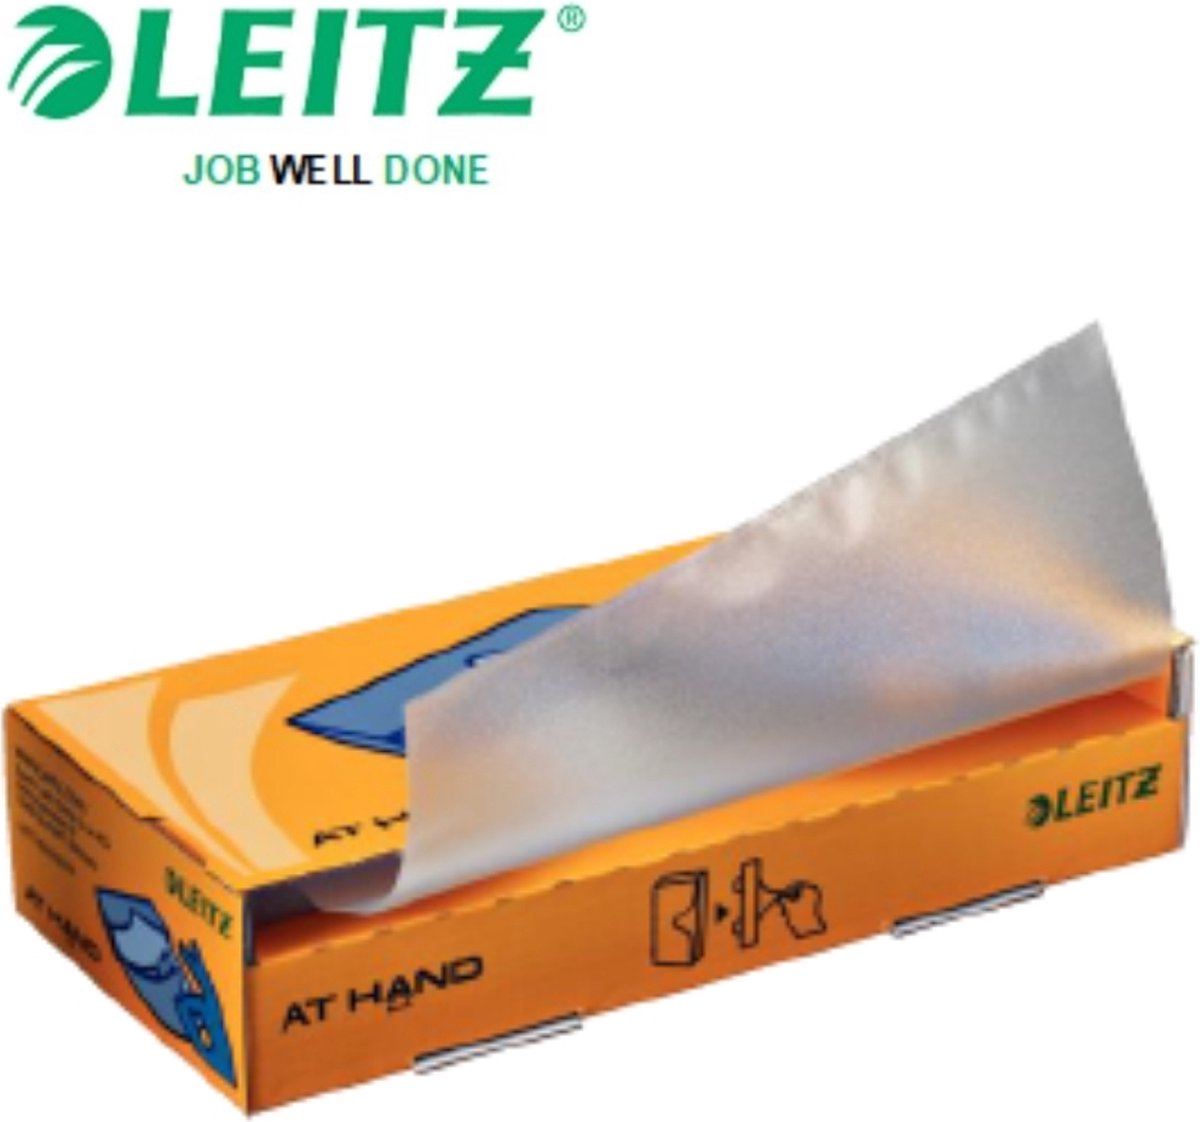 LEITZ 4018 AT HAND SEE-THROUGH PLASTIC FOLDERS, L-SHAPE, 2-SIDE OPEN- PKT OF 50- PACKAGED LIKE A TISSUE BOX